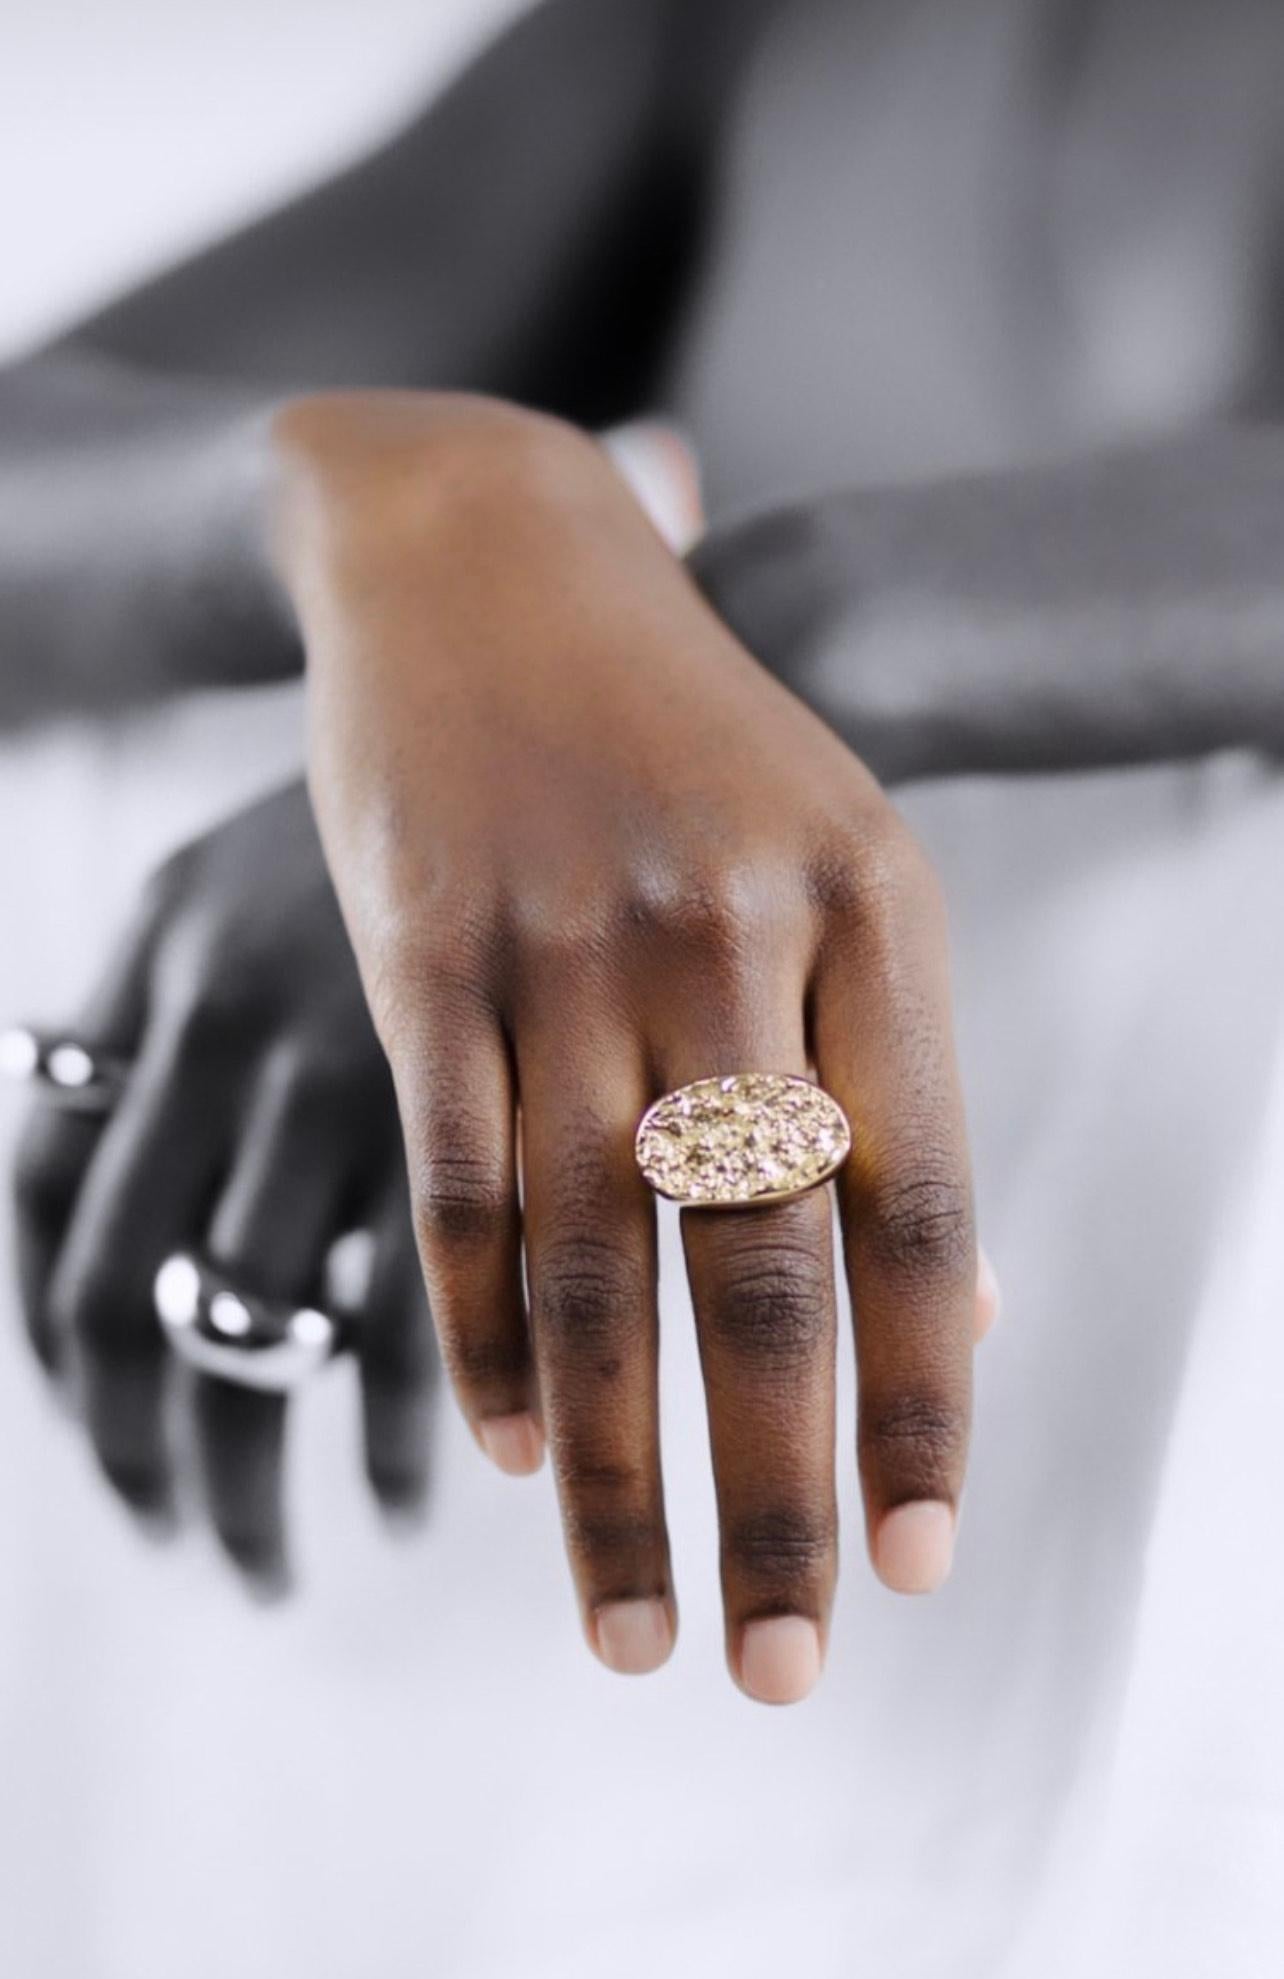 This beautifully textured 22 Karat Gold Vermeil Nugget Ring is a spin on a classic shape, designed for the modern jewelry lover who appreciates timeless pieces with a sophisticated edge.  

Size 7- Ring Size is customizable.

All items are made to